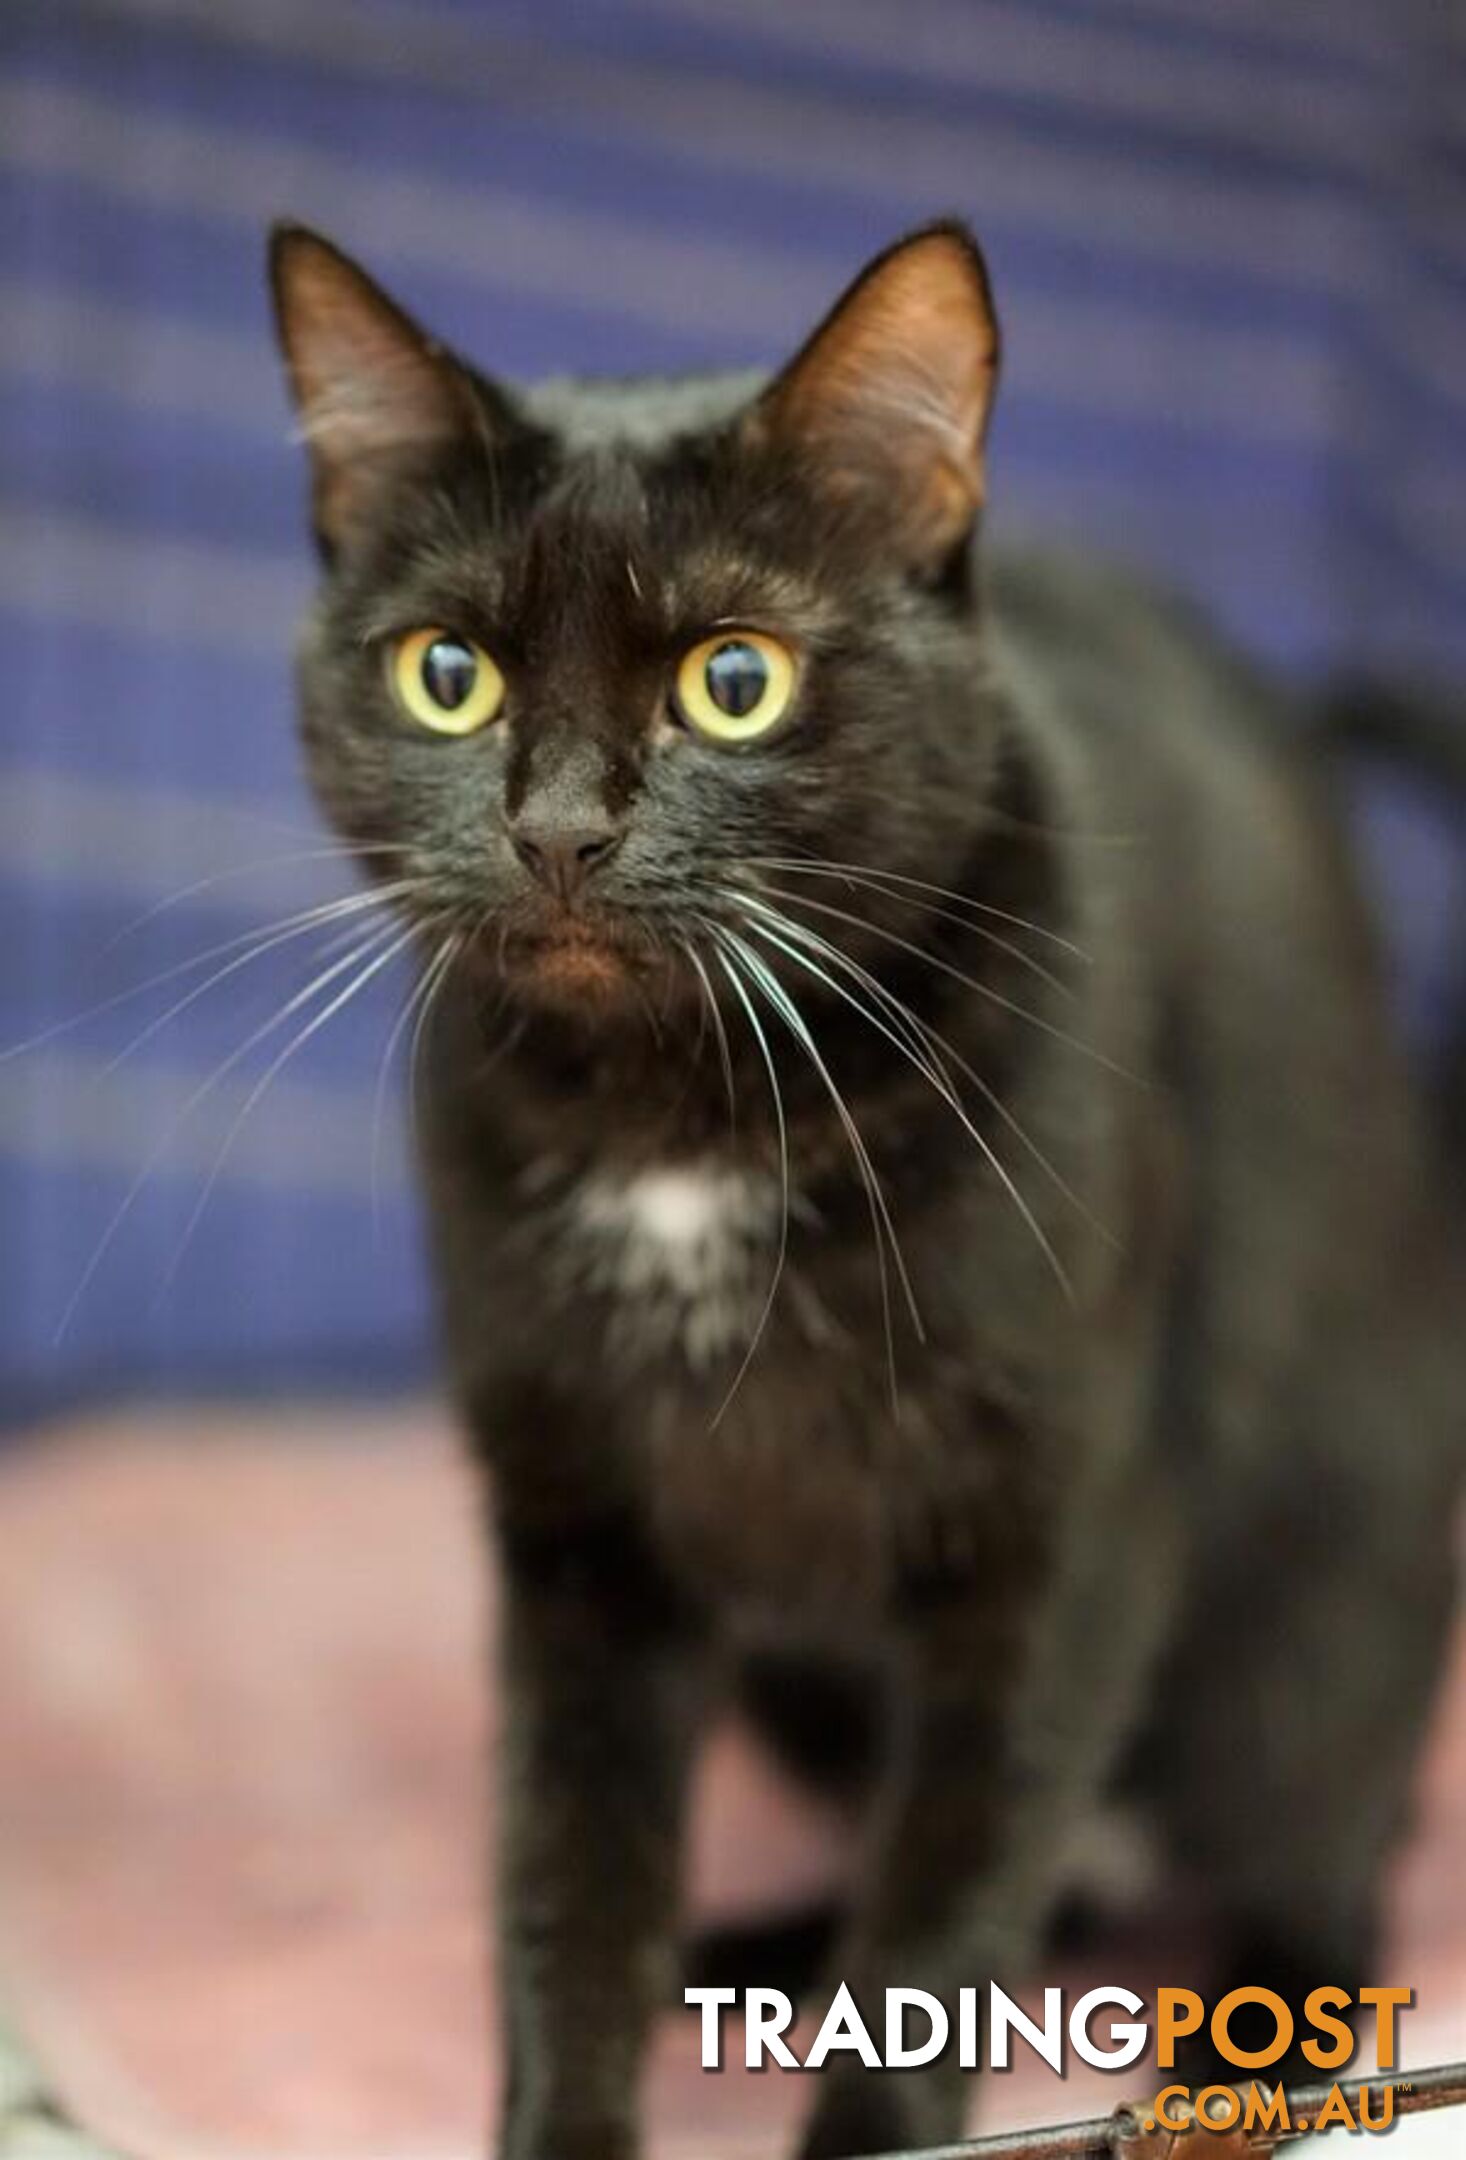 Selina - Domestic Short Hair, 6 Years 0 Months 3 Weeks (approx)